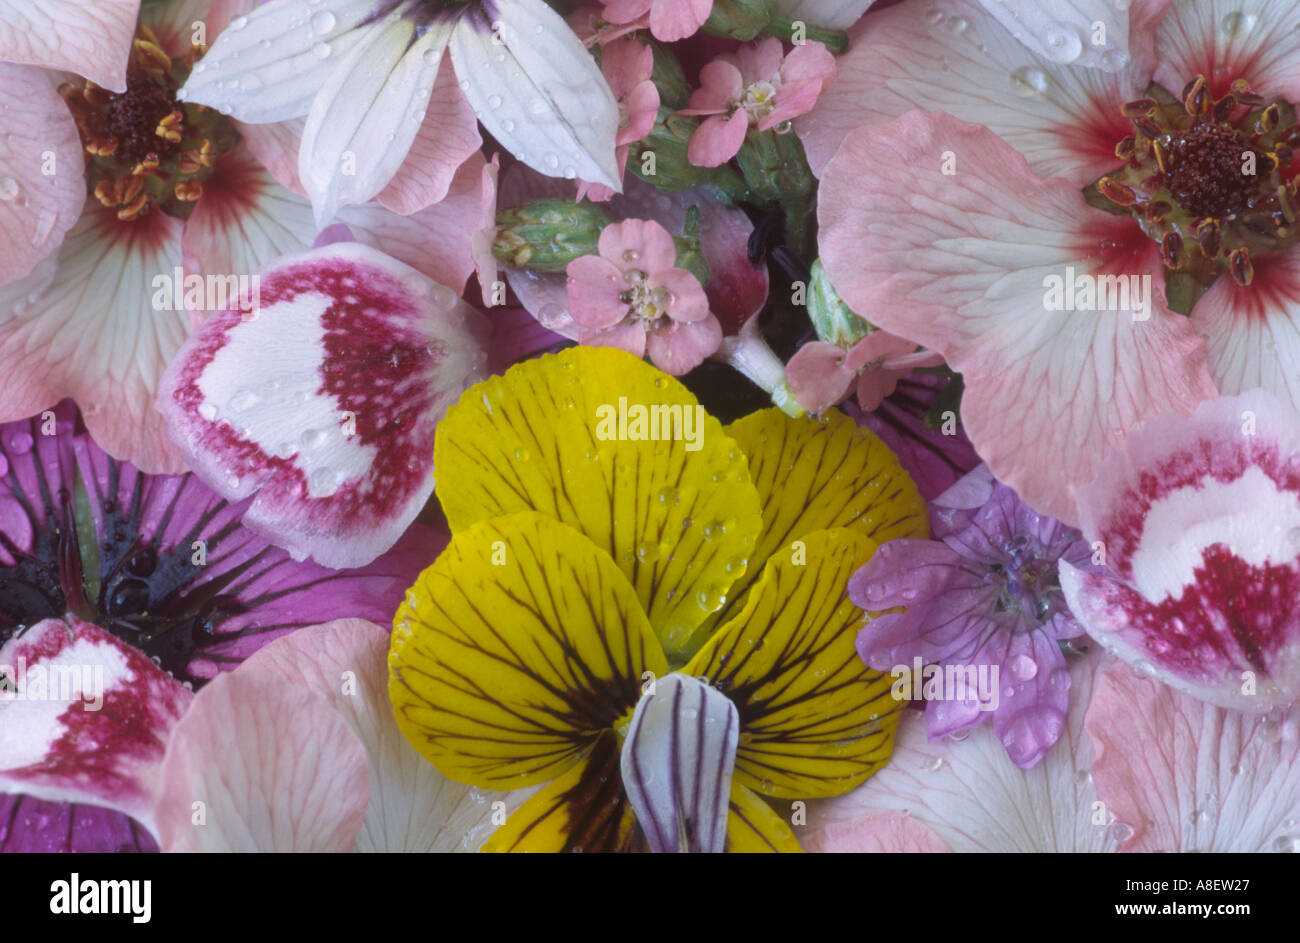 Pattern from assorted flower heads and petals. Stock Photo